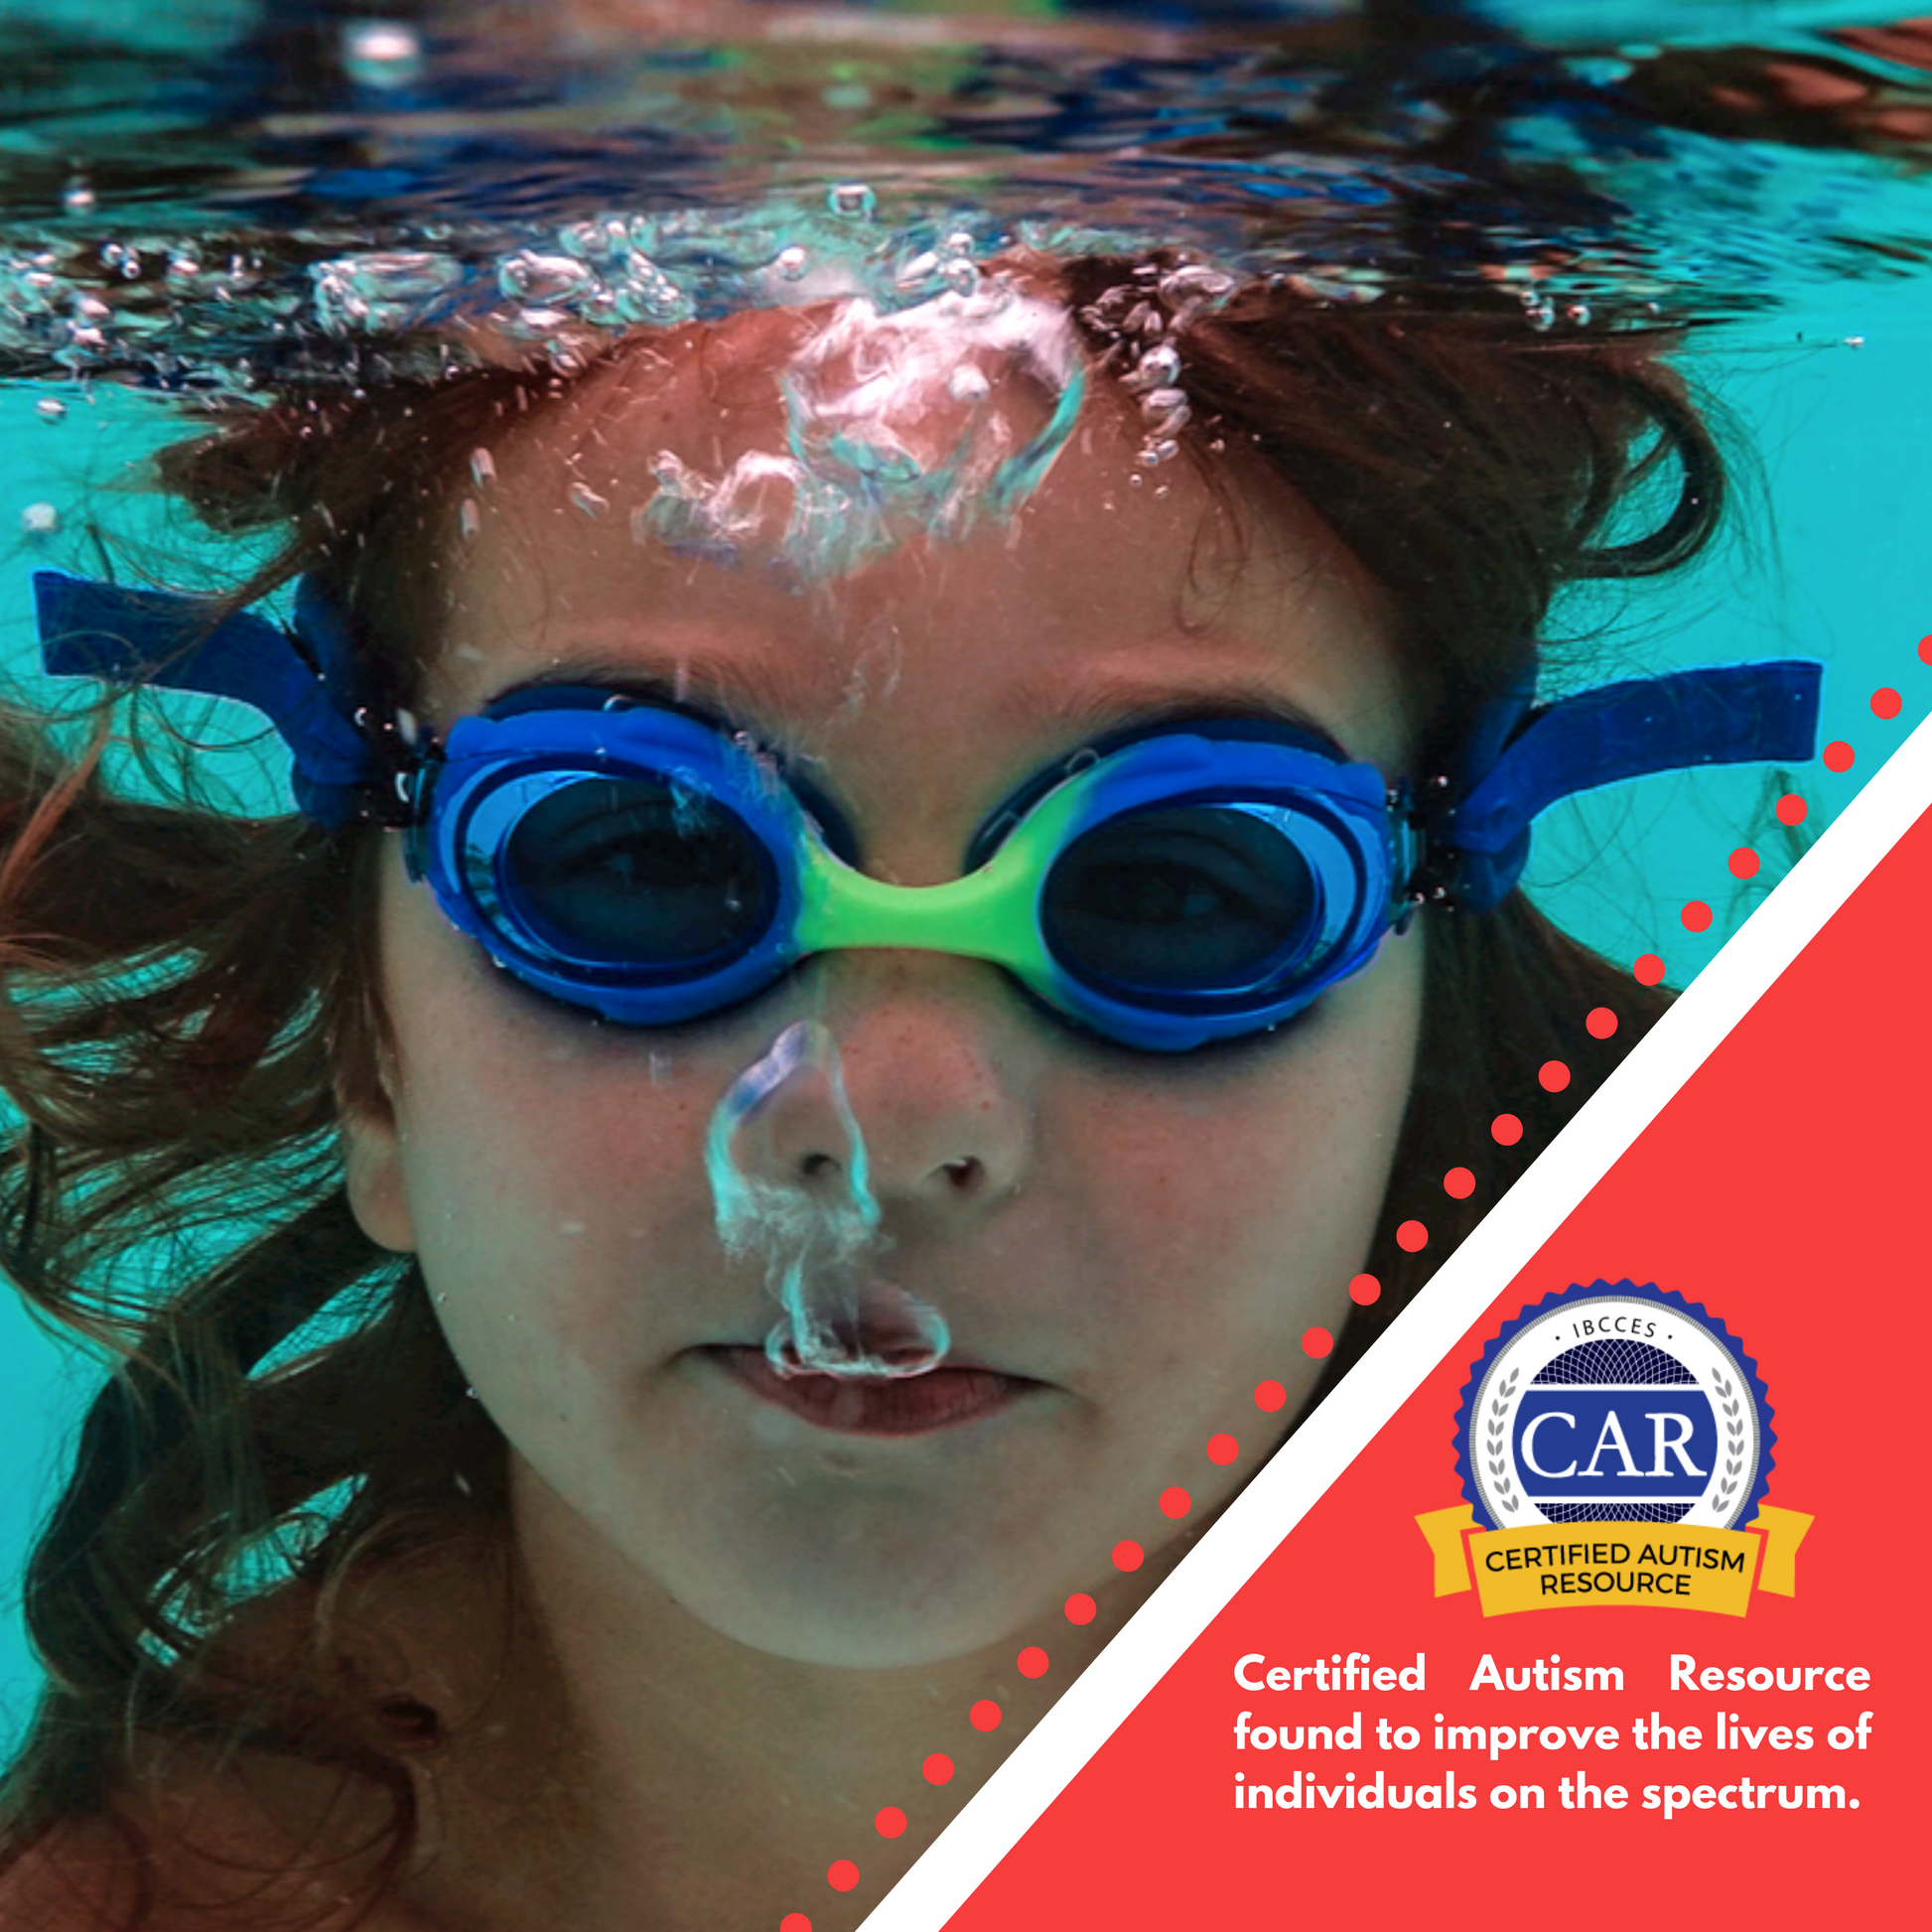 Young girl underwater blowing bubbles wearing blue frogglez goggles with green nose bridge. Text reads certified autism resource found to improve lives of individuals on the spectrum